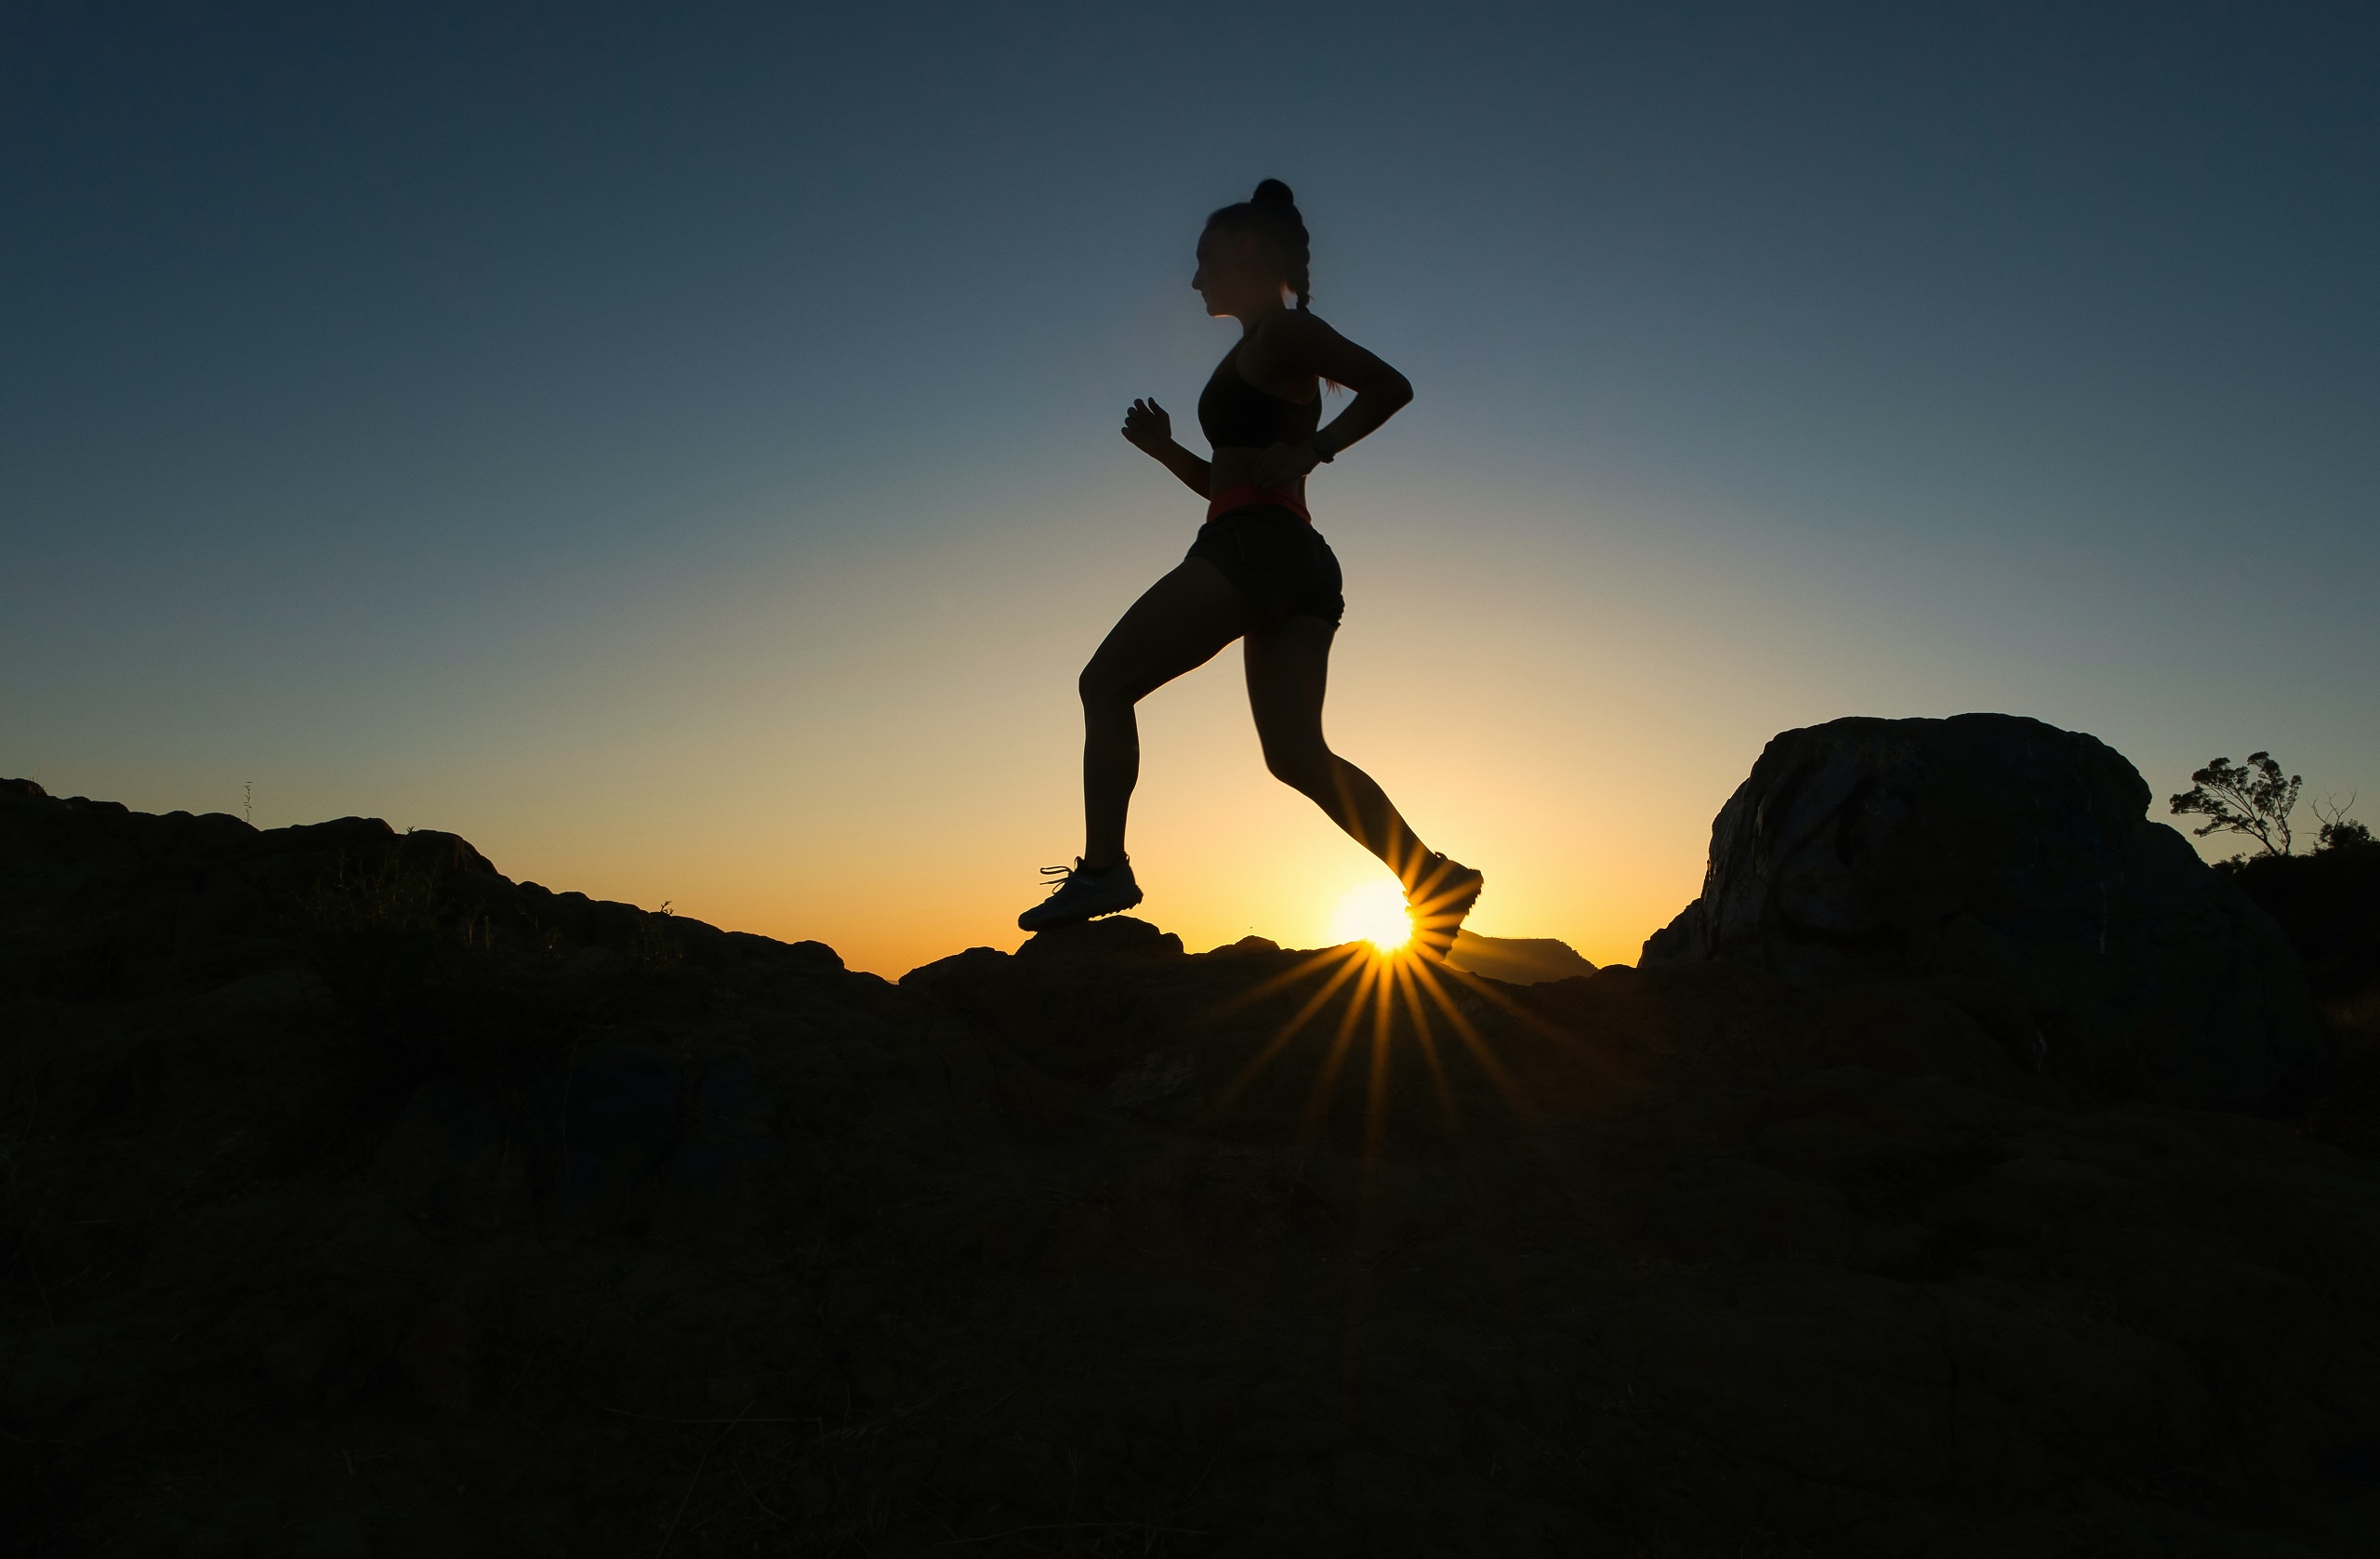 Silhouette of a woman runs across some rocks as the sun starts to rise behind her